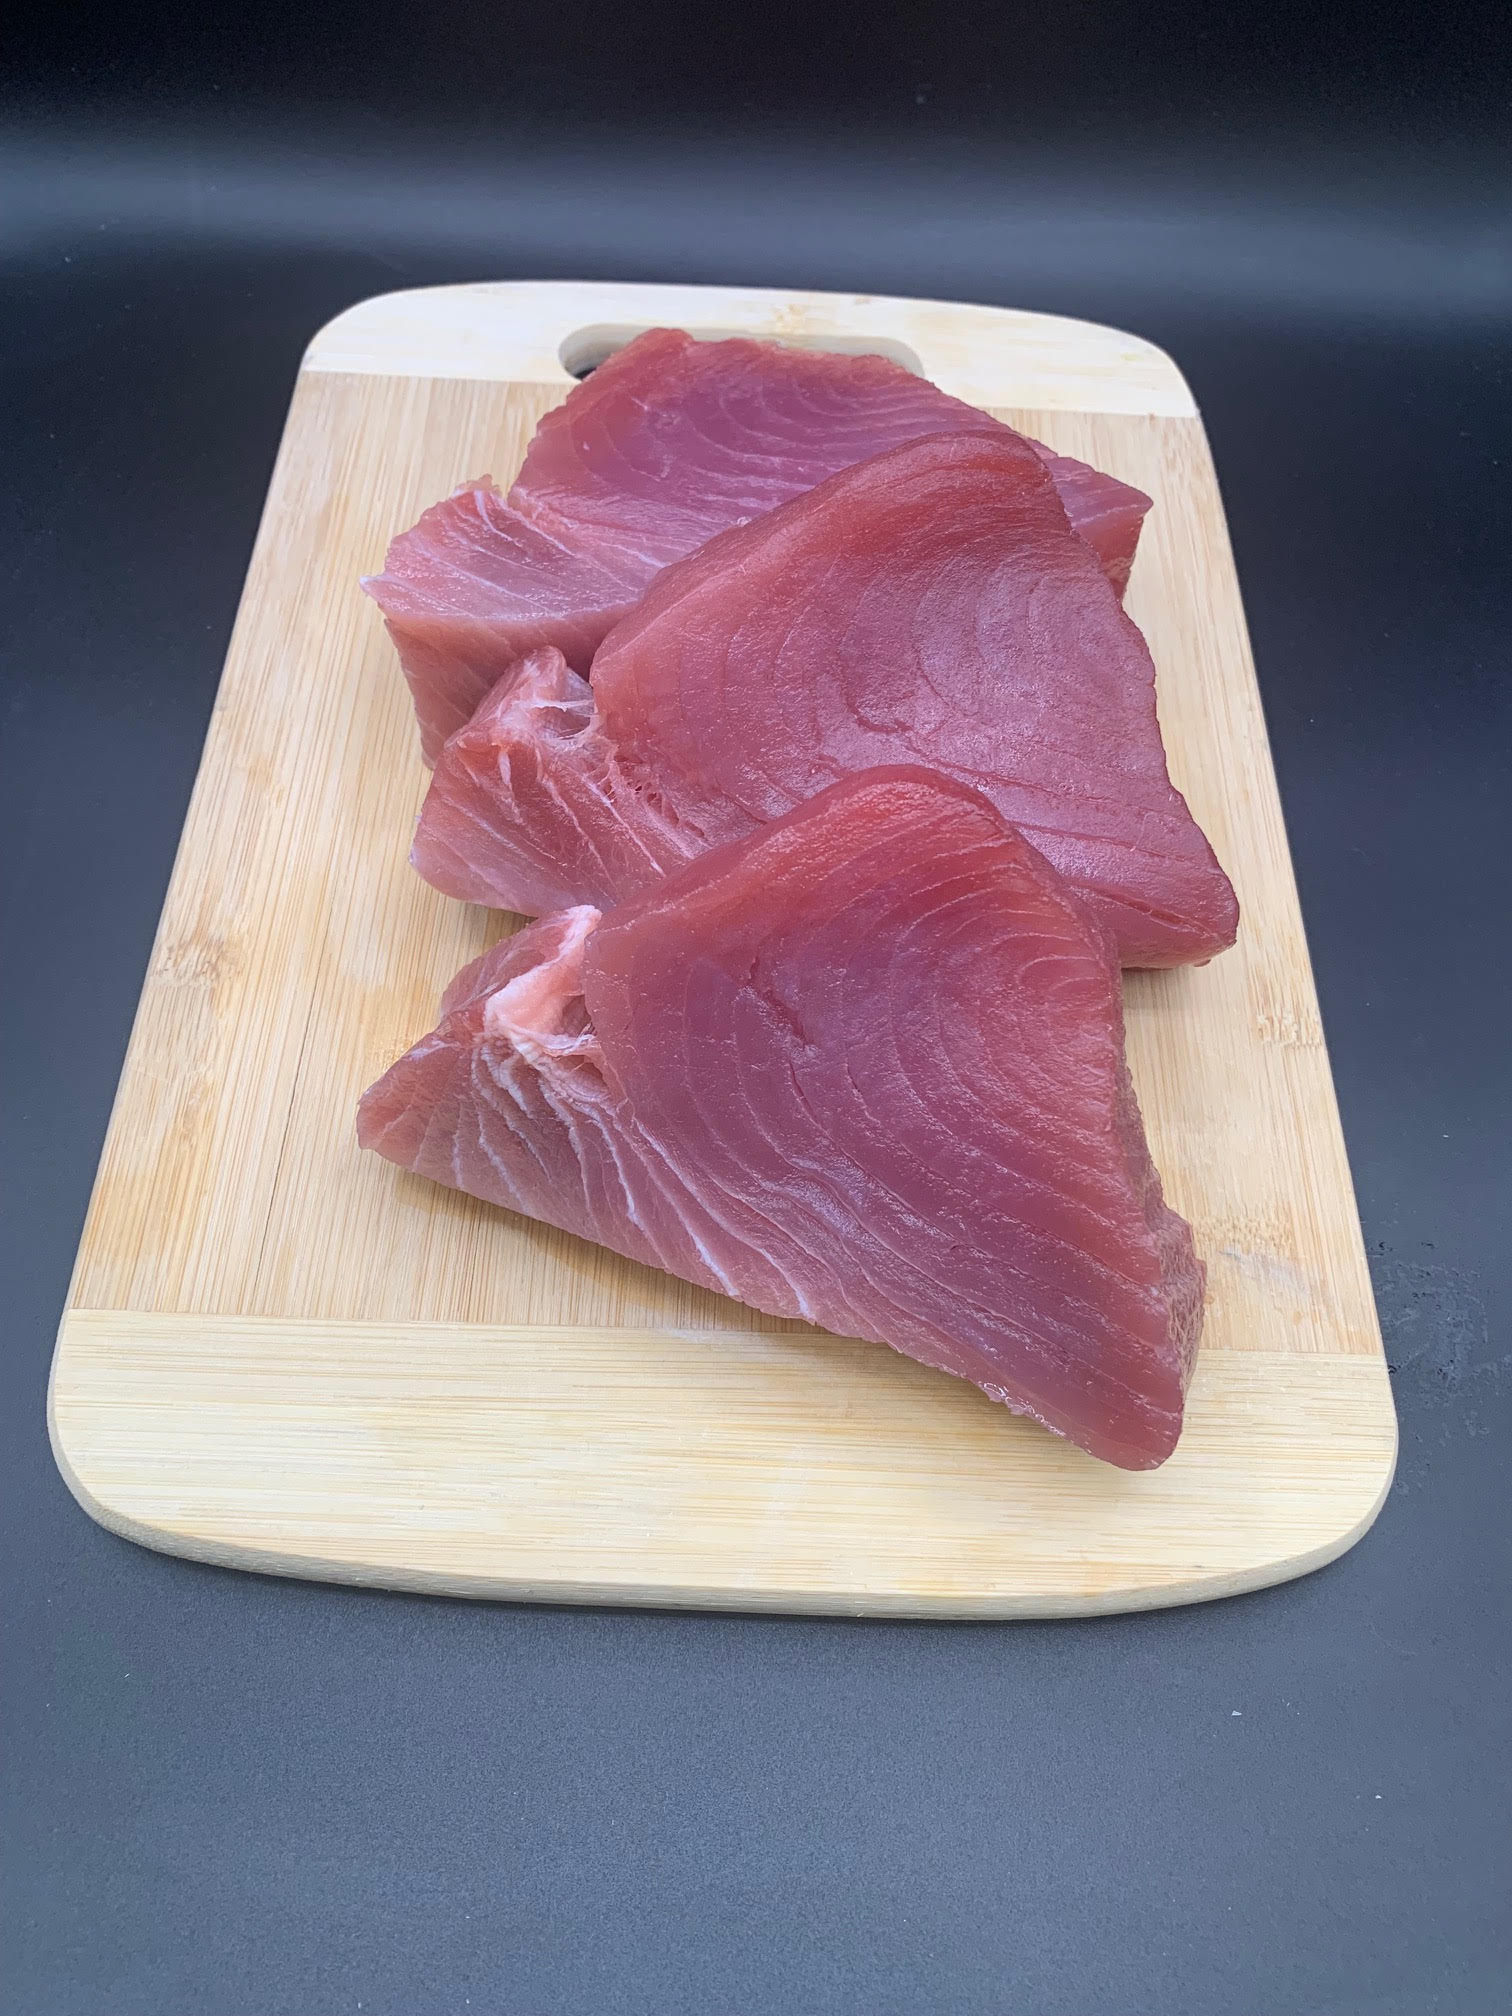 The Ultimate Guide To Buying Ahi Tuna Elise Tries To Cook, 51% OFF